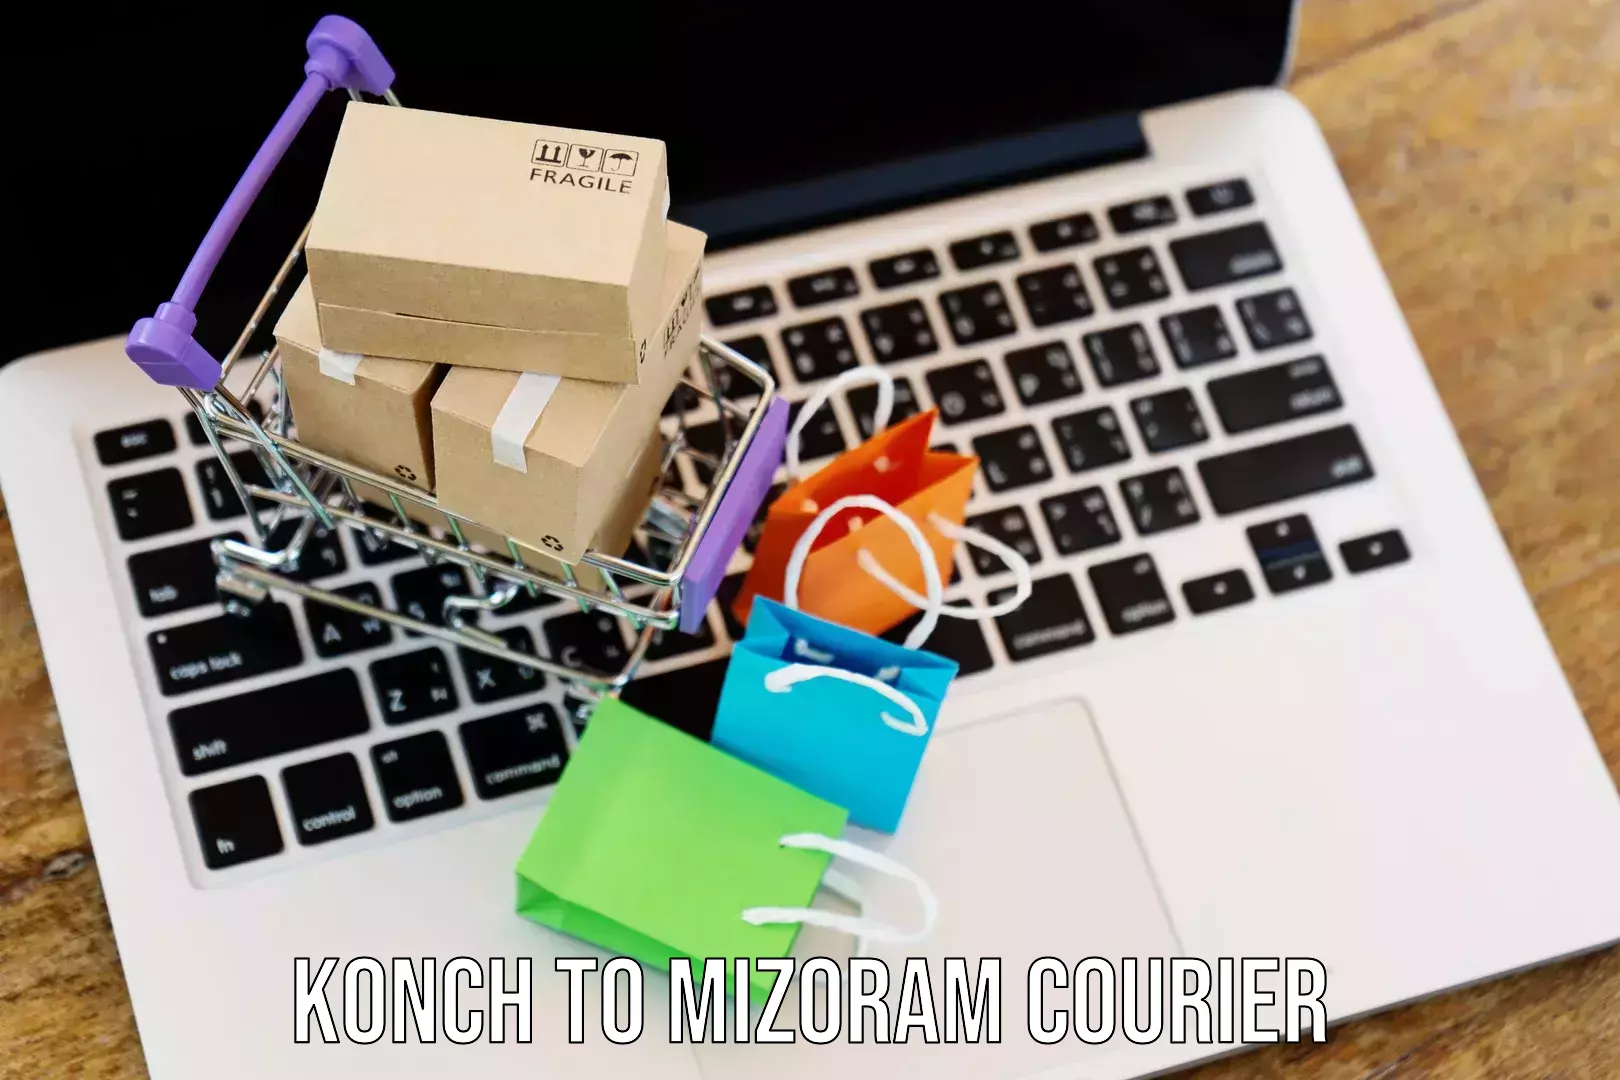 Efficient courier operations Konch to Mizoram